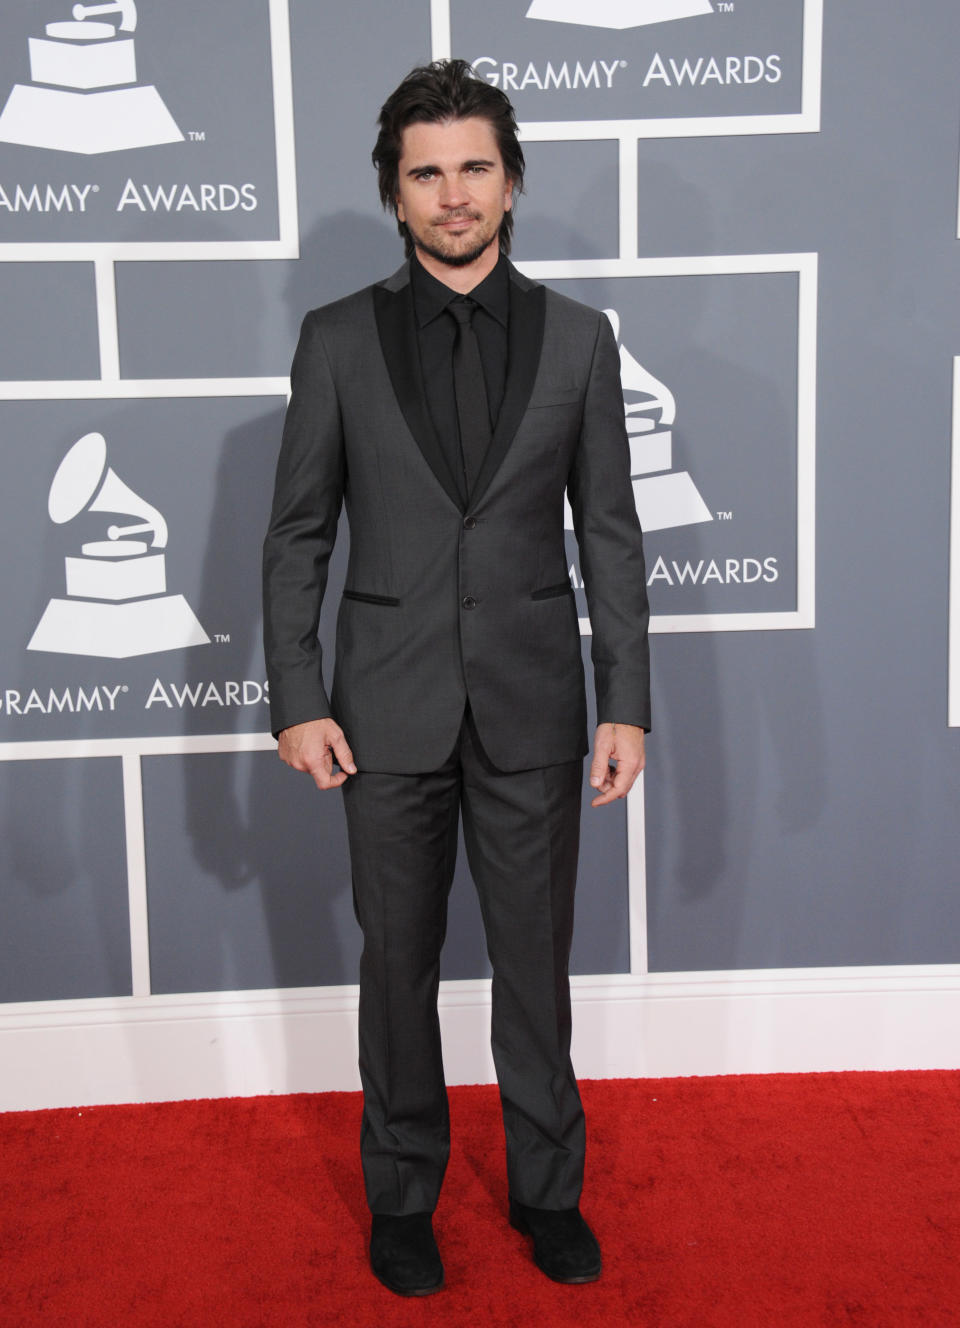 <p>It turns out the name "Juanes" is actually a combination of the singer's first names. His full name is:&nbsp;<a href="http://www.imdb.com/name/nm1535150/bio">Juan Esteban Aristiz&aacute;bal V&aacute;squez.</a></p>